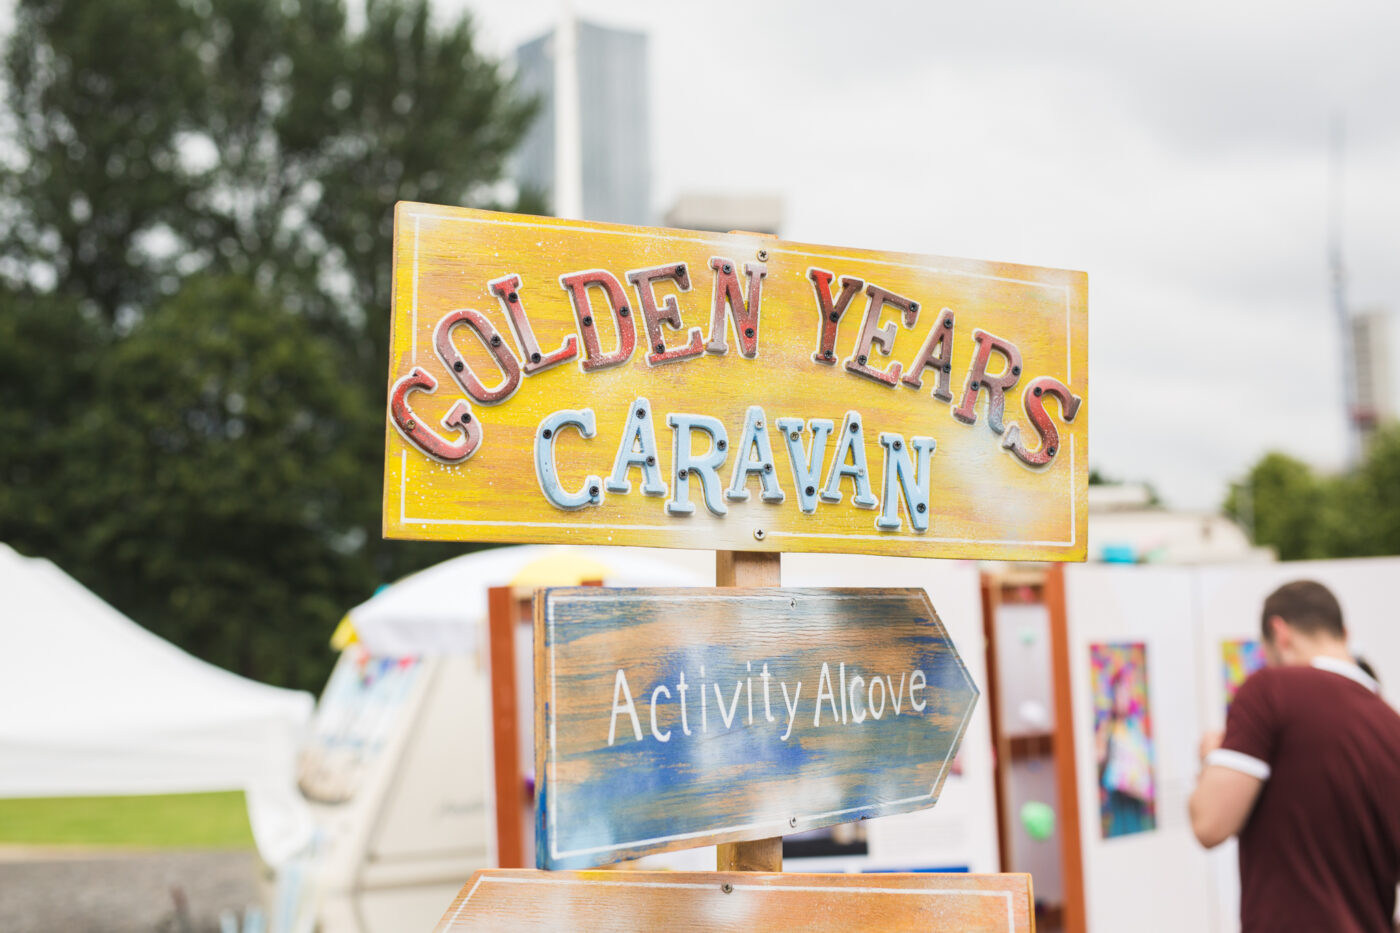 A yellow signpost reads Golden Years Caravan at the top, with an arrow underneath pointing the way to activity alcove.